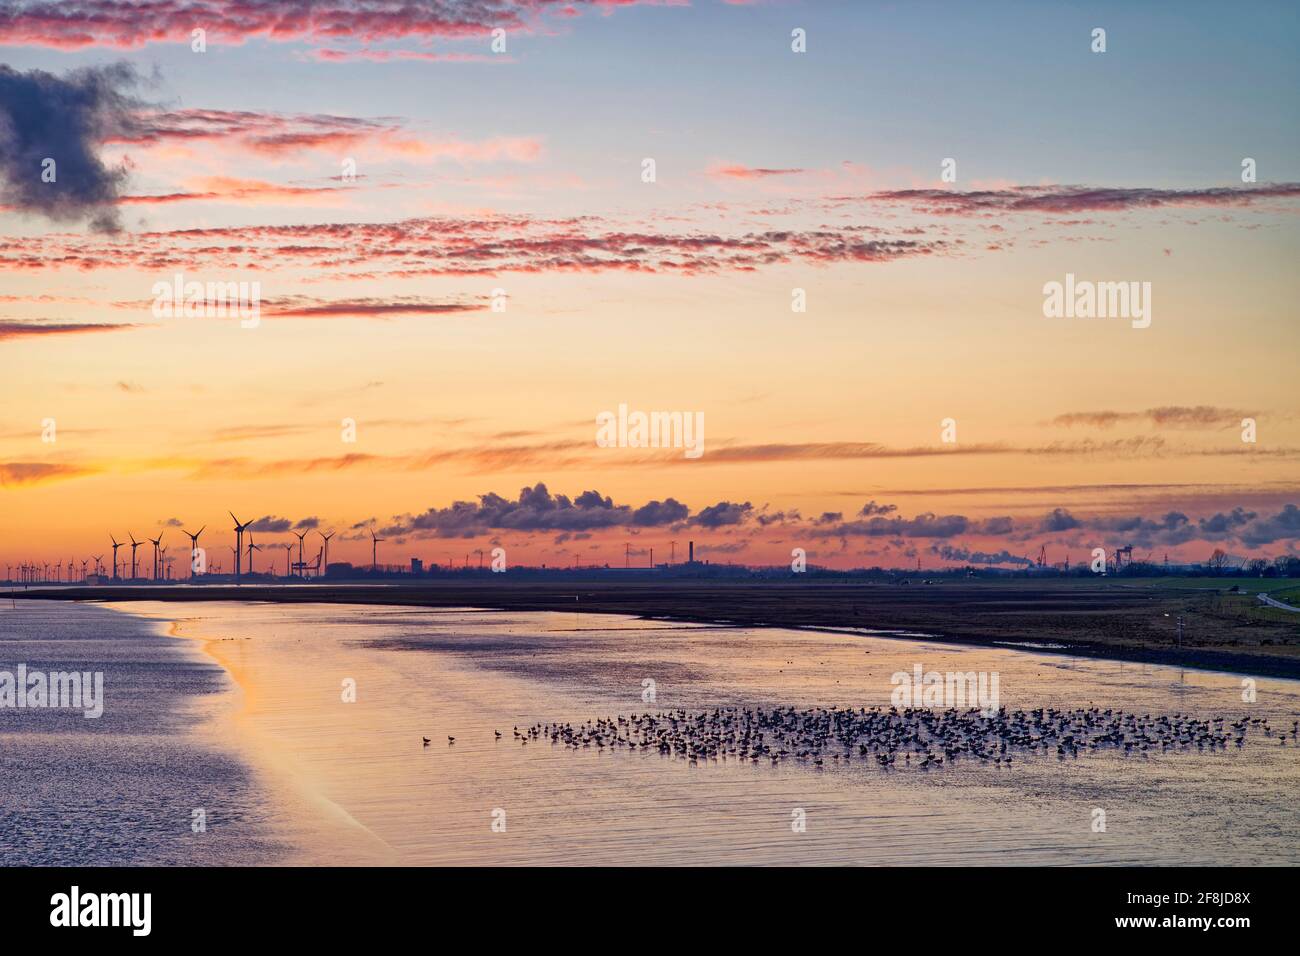 Flock of barnacle geese standing on riverbank of Ems River with wind turbines in the distance, East Frisia, Lower Saxony, Germany Stock Photo